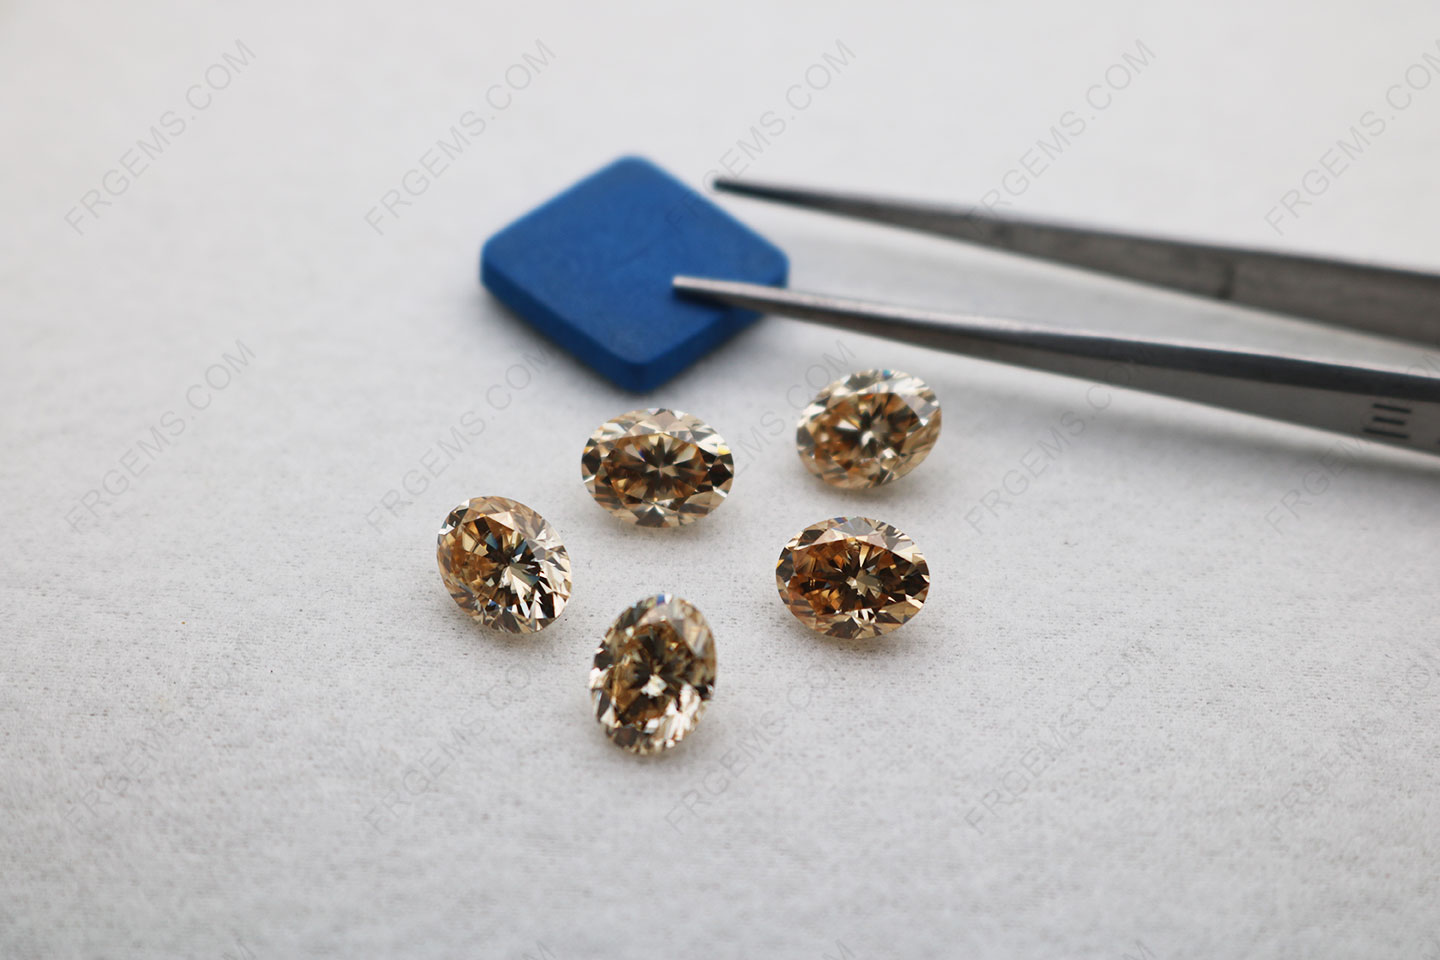 Best Quality Loose Moissanite Champagne Color Oval Faceted Brilliant cut 9X7mm gemstones